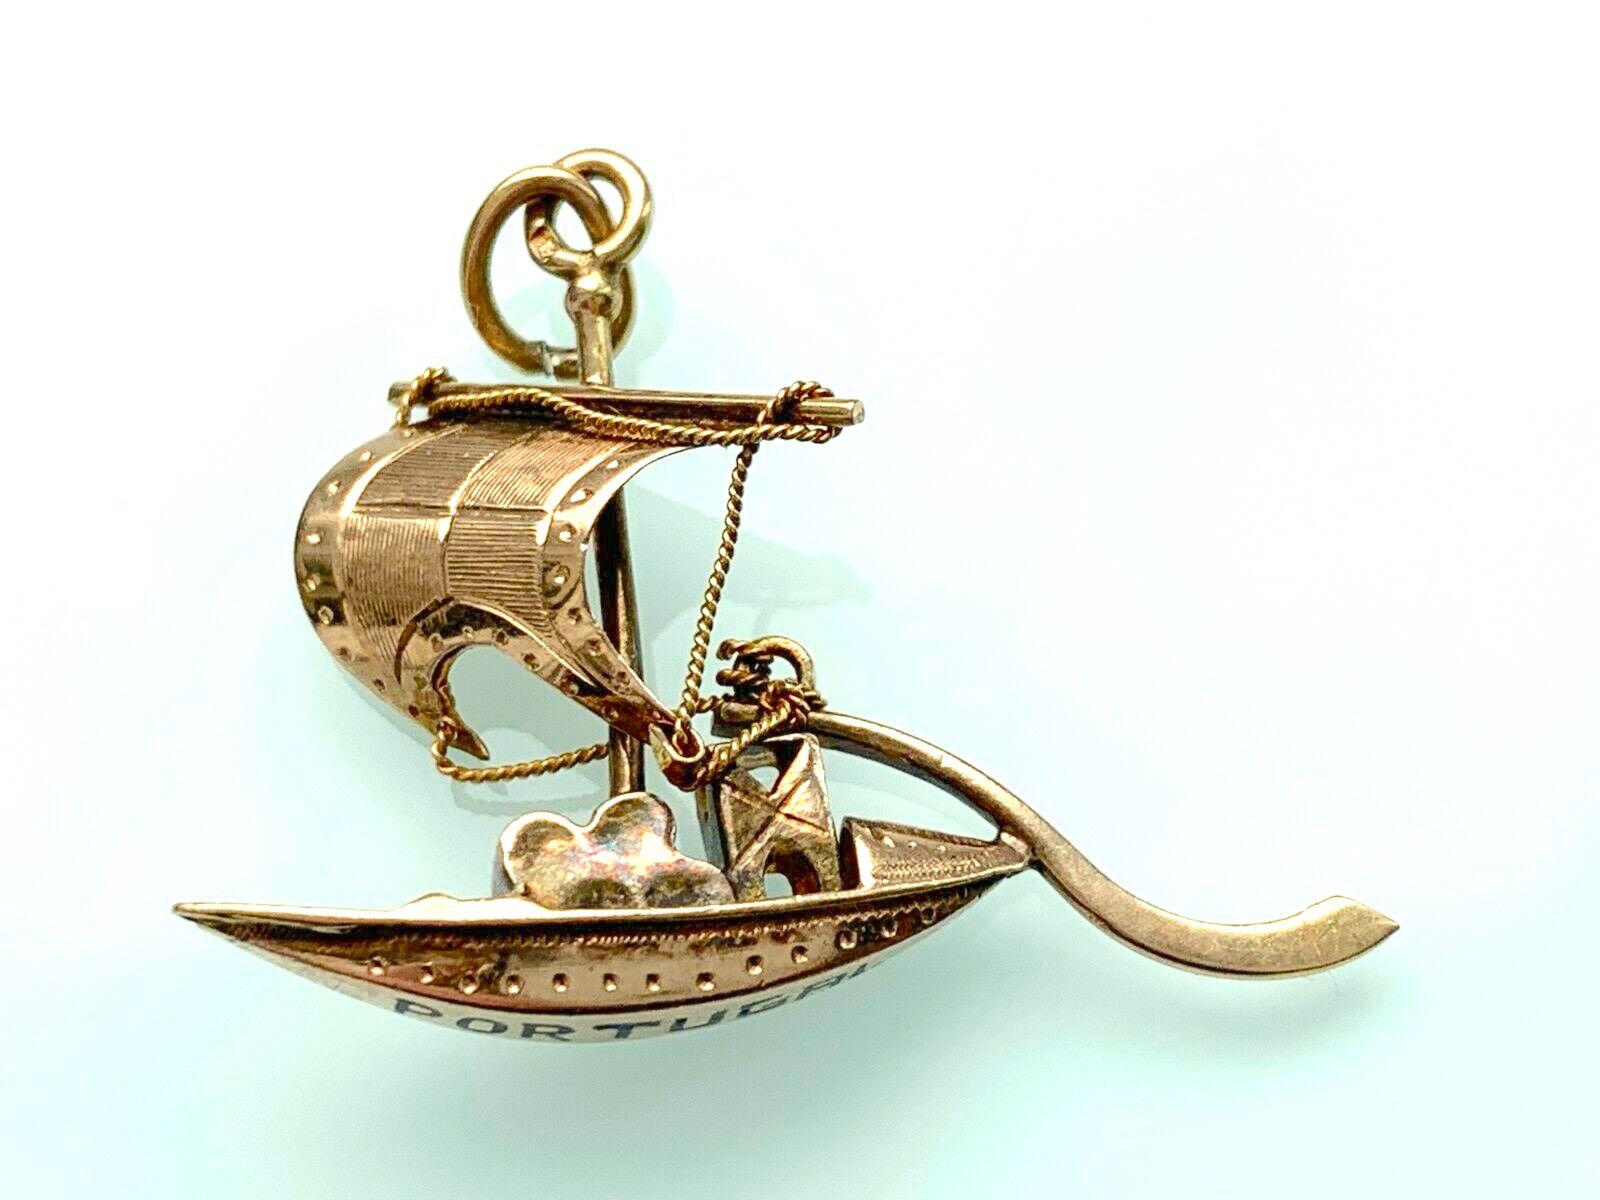 Beautiful Classical antique
Portuguese Galleon Ship Charm
Fully Marked around the bail 
It is 19 Carat Gold 
